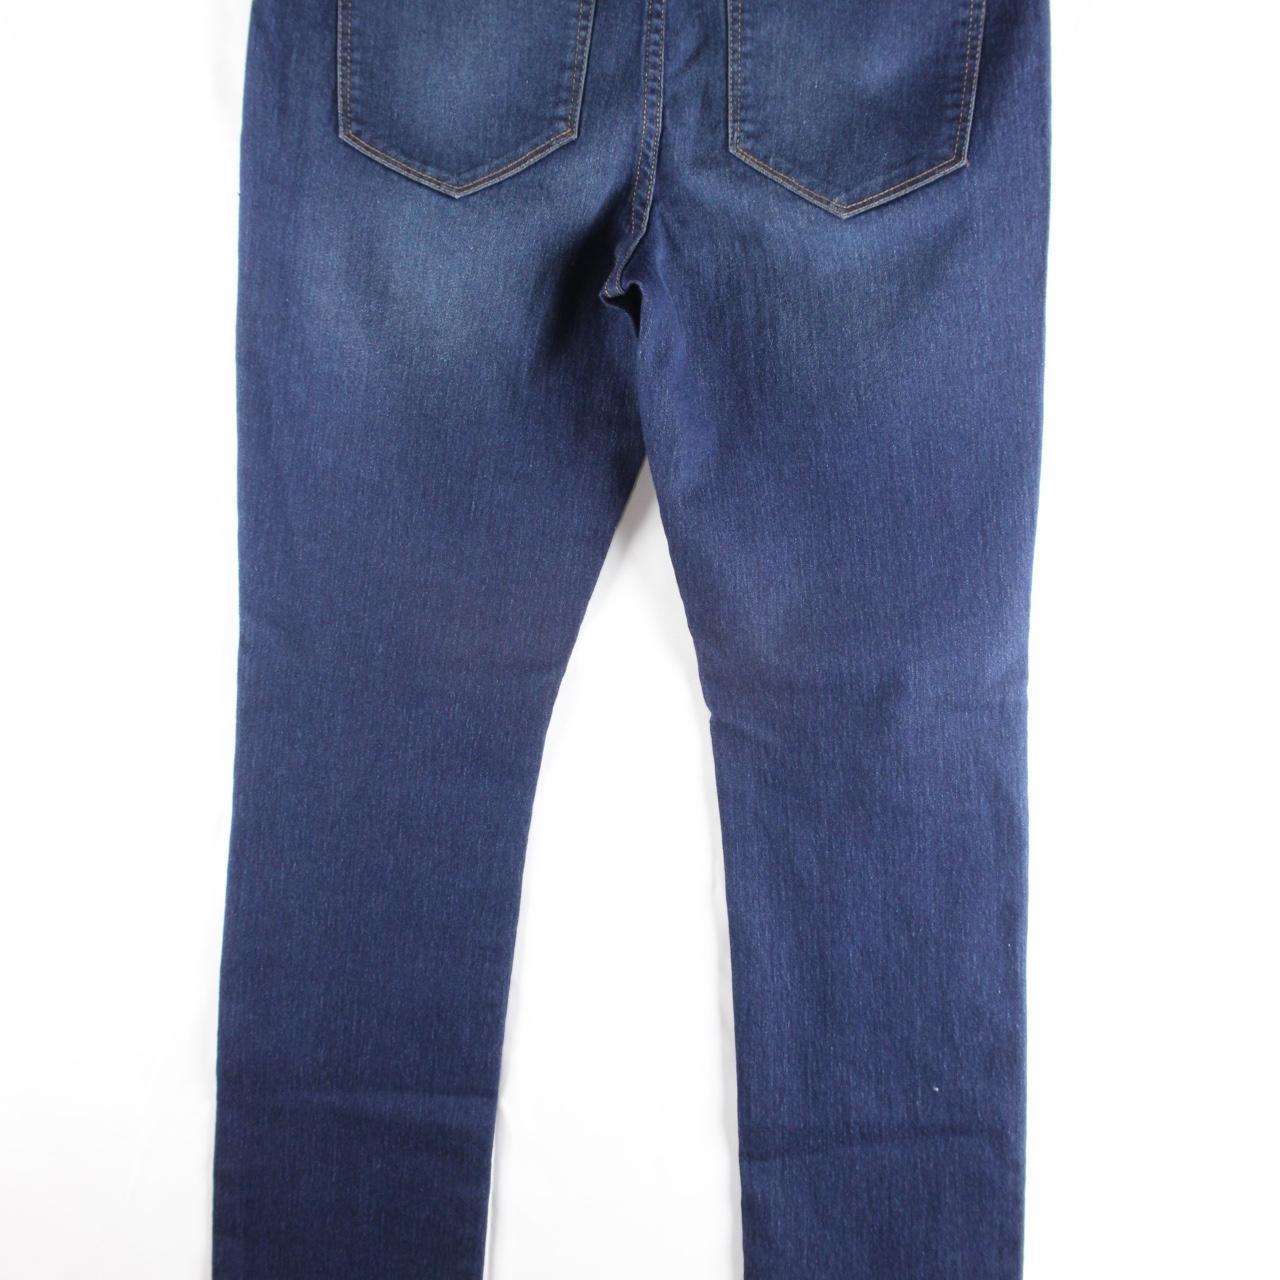 Soho JEANS NEW YORK & COMPANY 100% Cotton Solid Blue Jeans Size 8